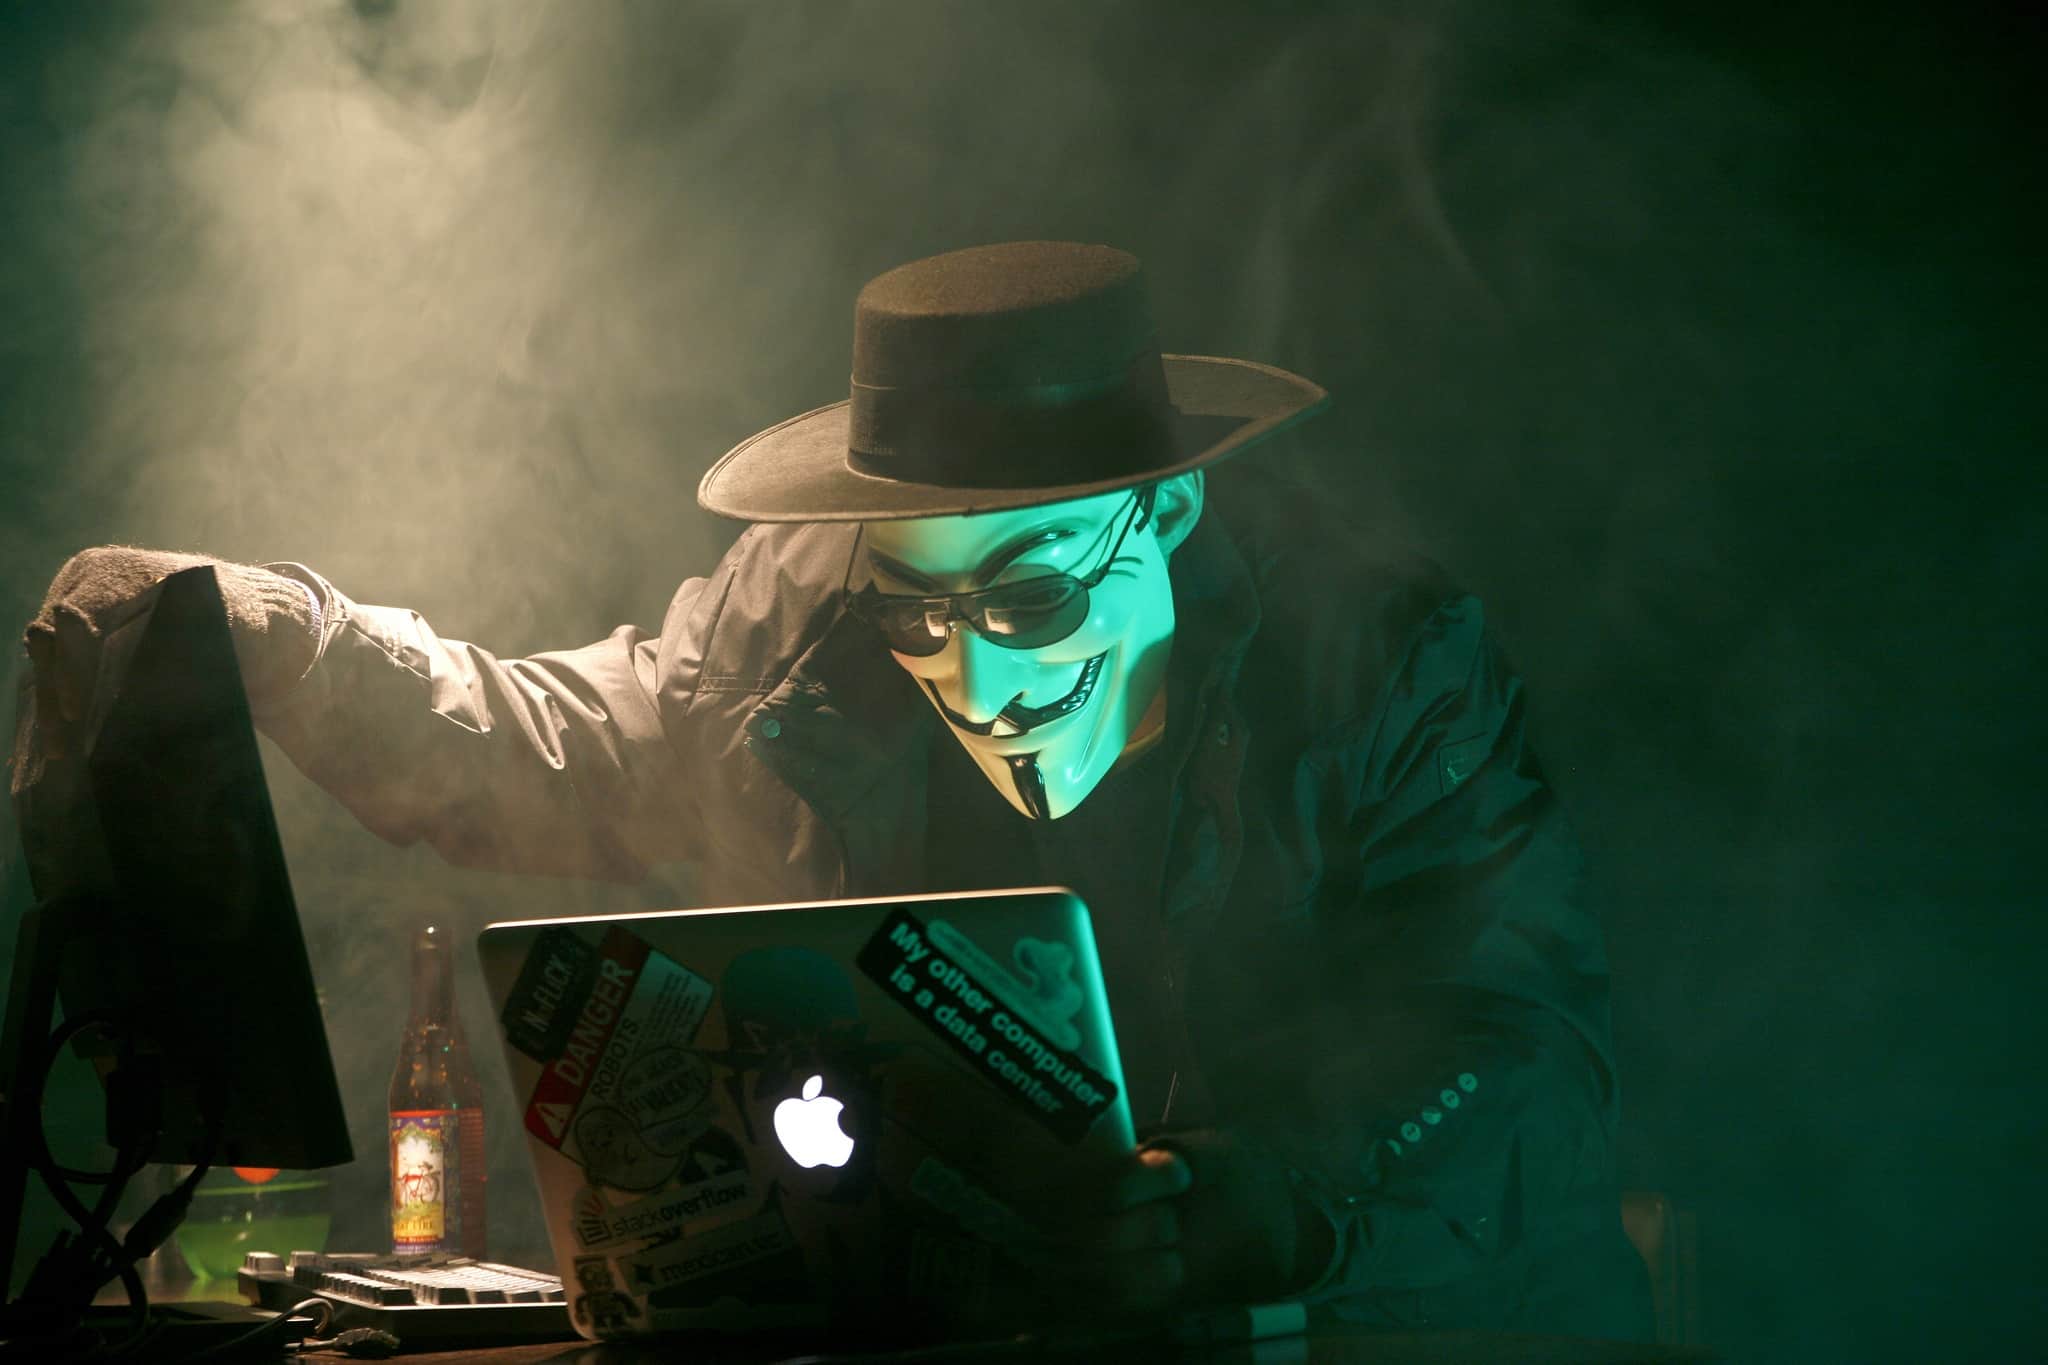 Why is internet important? because hackers are out there